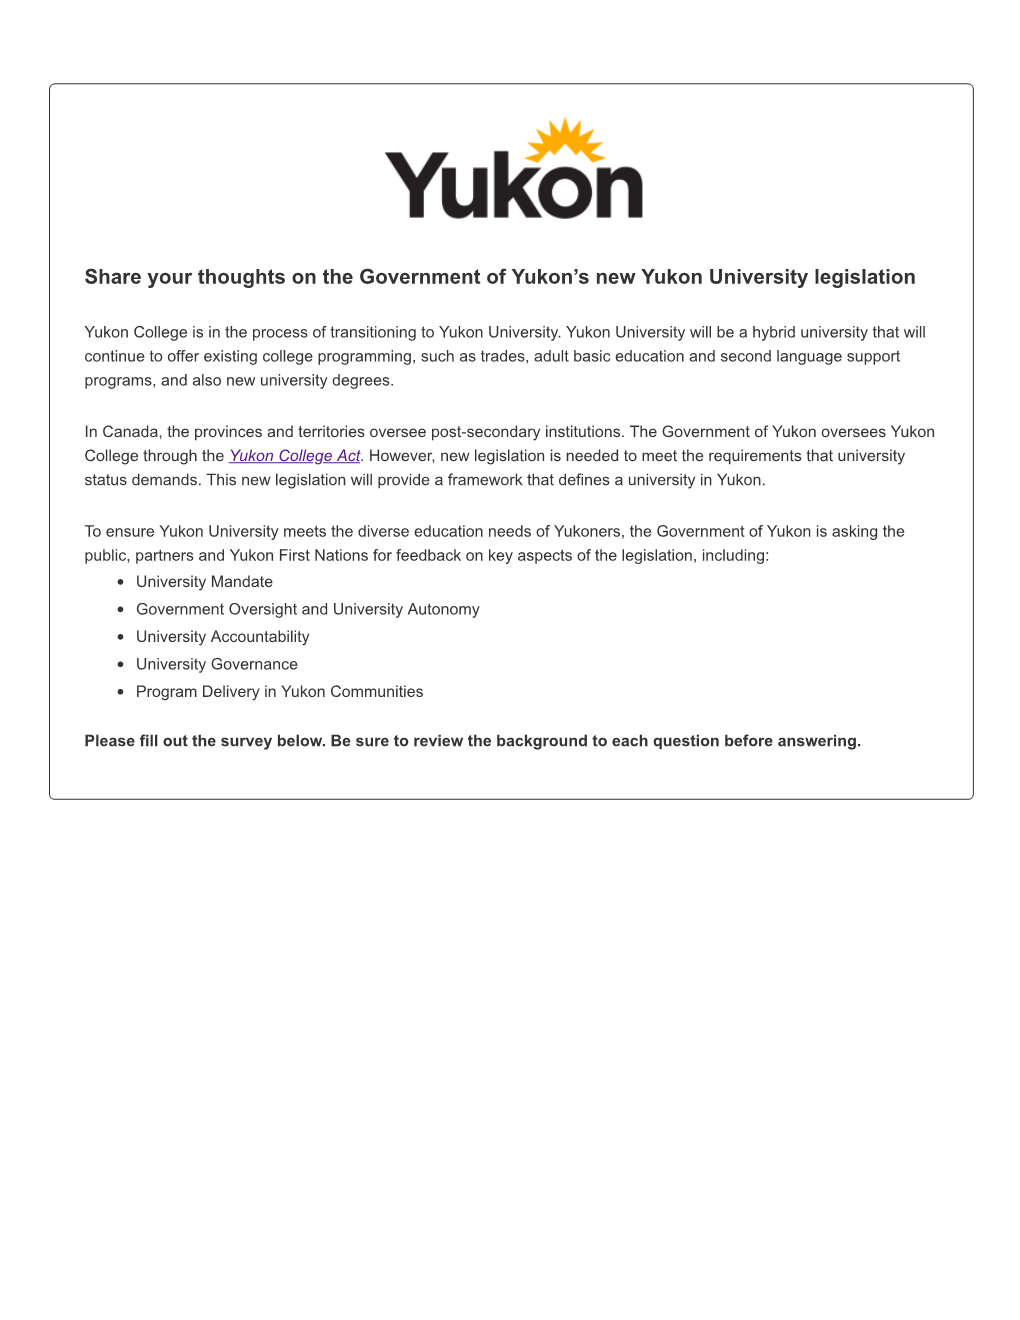 Share Your Thoughts on the Government of Yukon's New Yukon